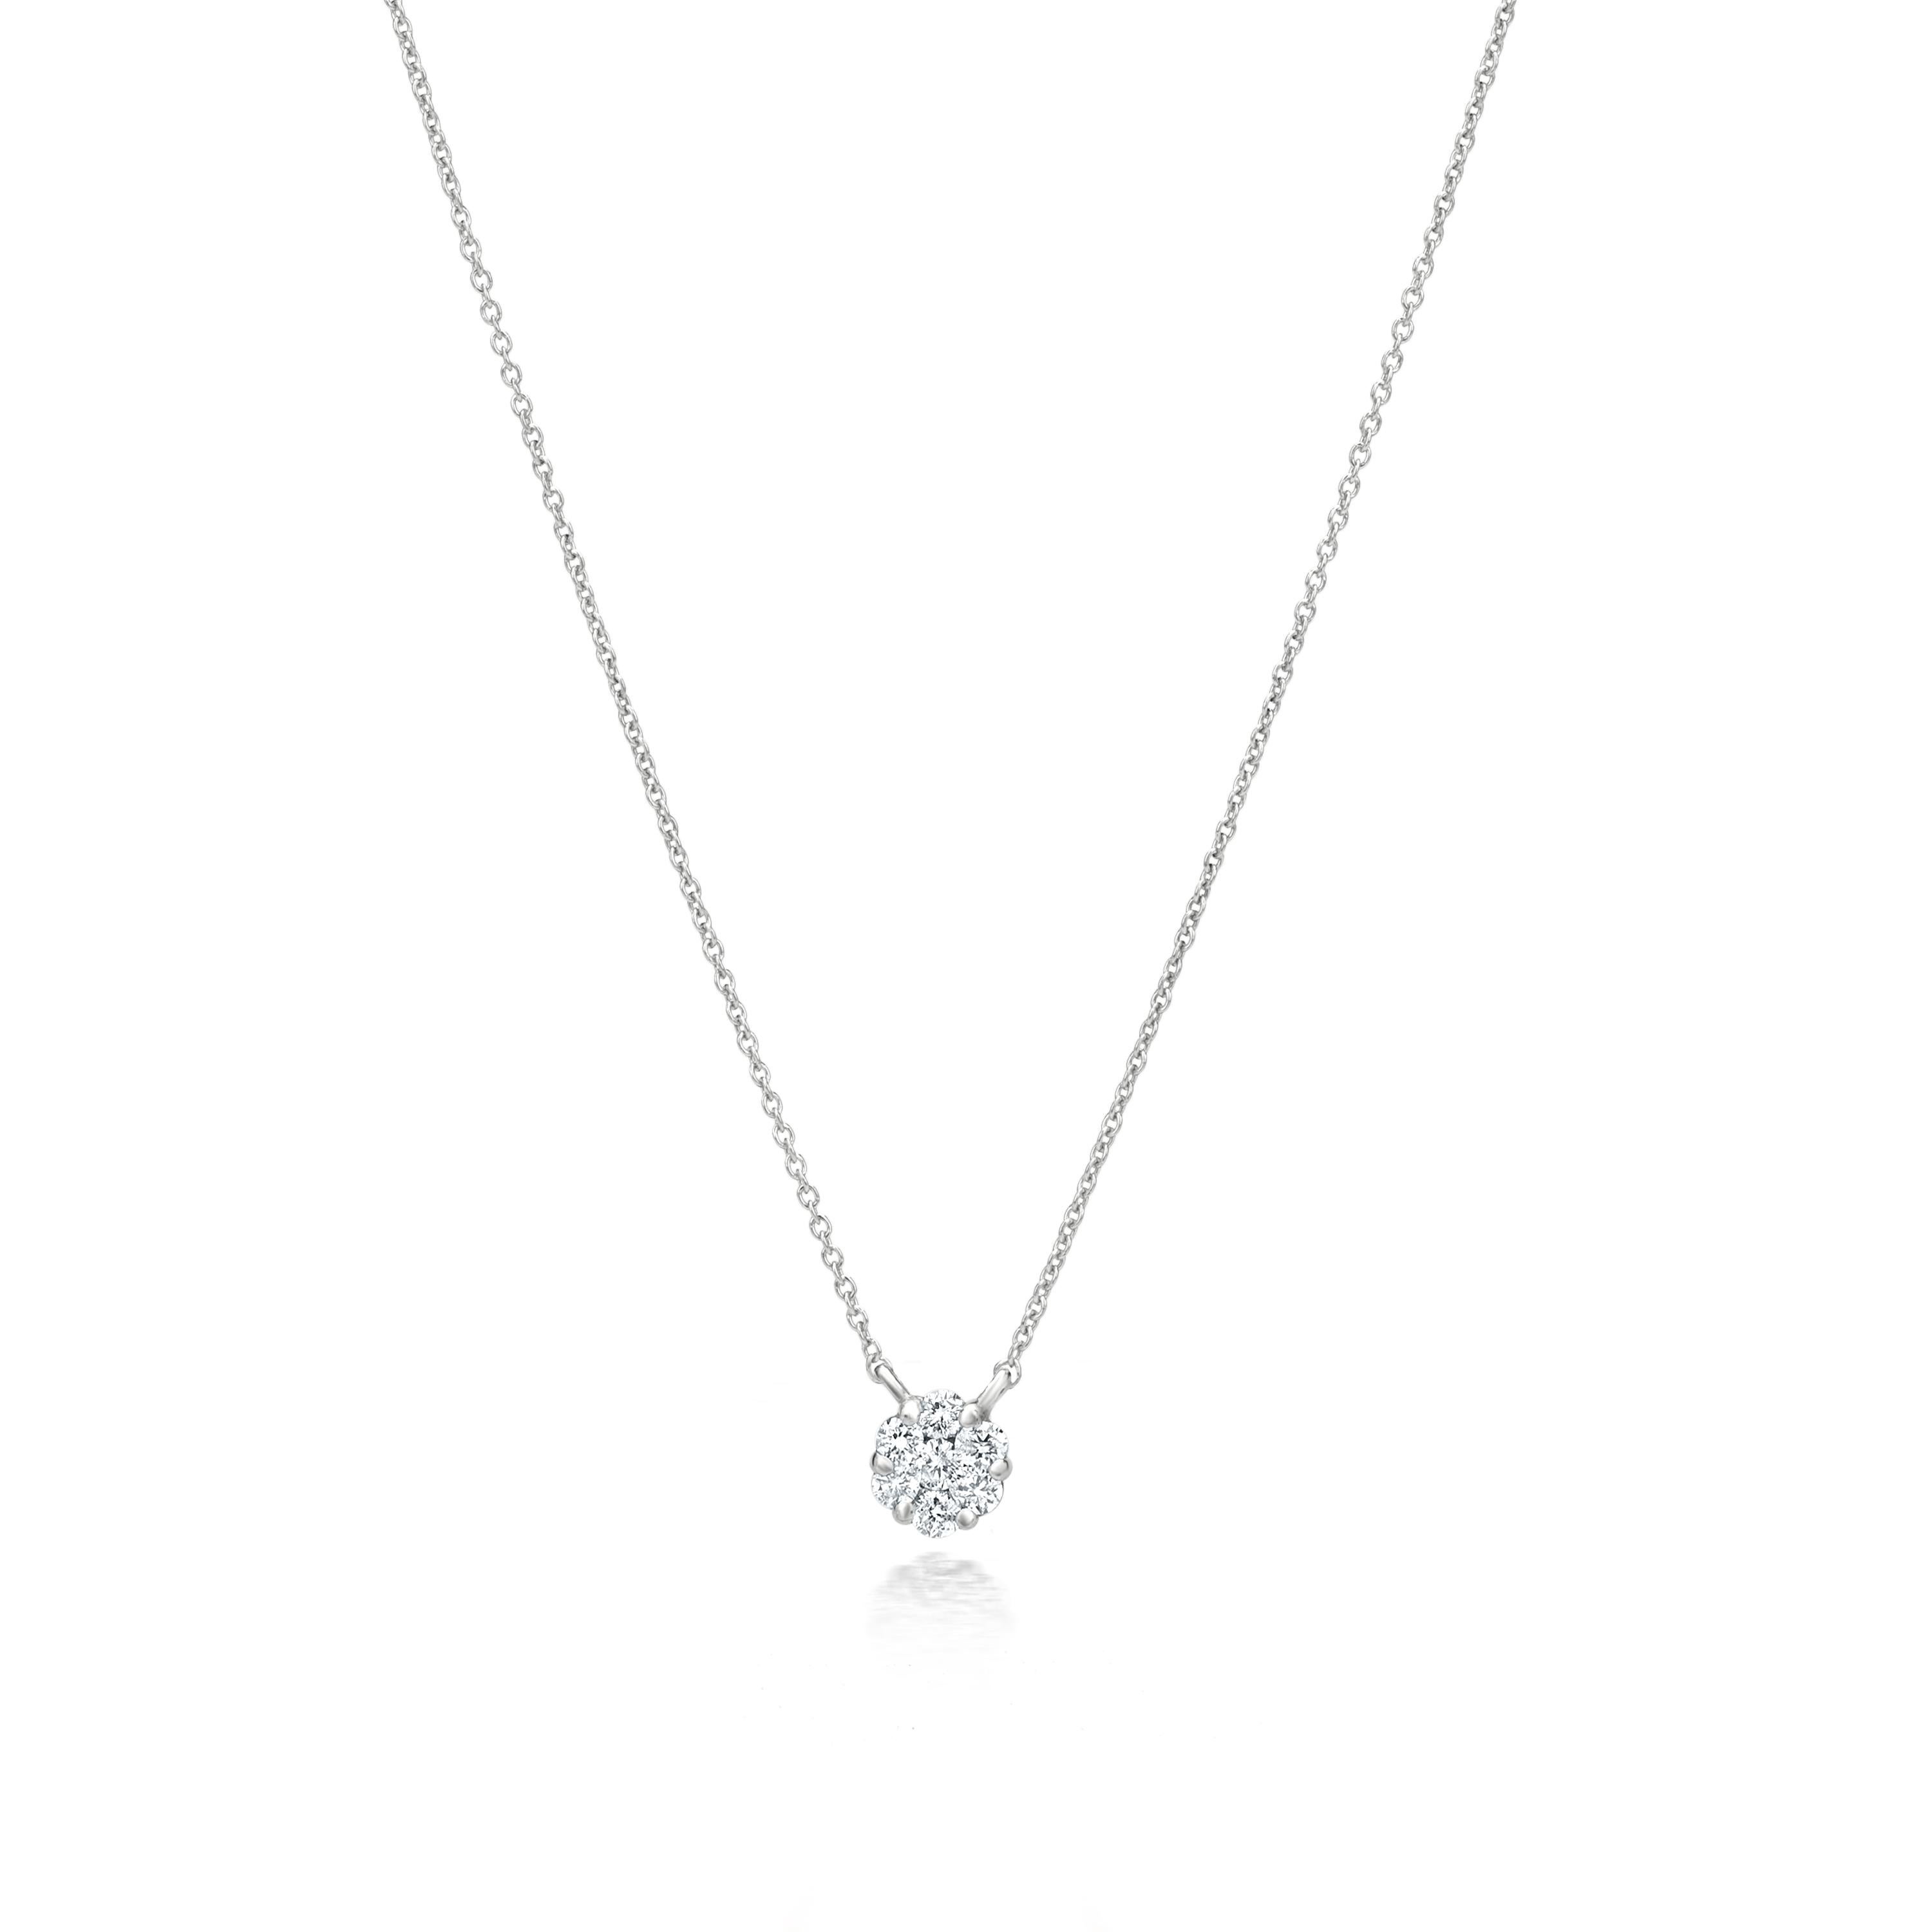 Grace your neckline with a Luxle diamond cluster pendant it symbolizes that you give each other the future, no matter what it holds. Subtle yet pretty this cluster pendant necklace is the new fashion statement. This necklace is featured with 7 round